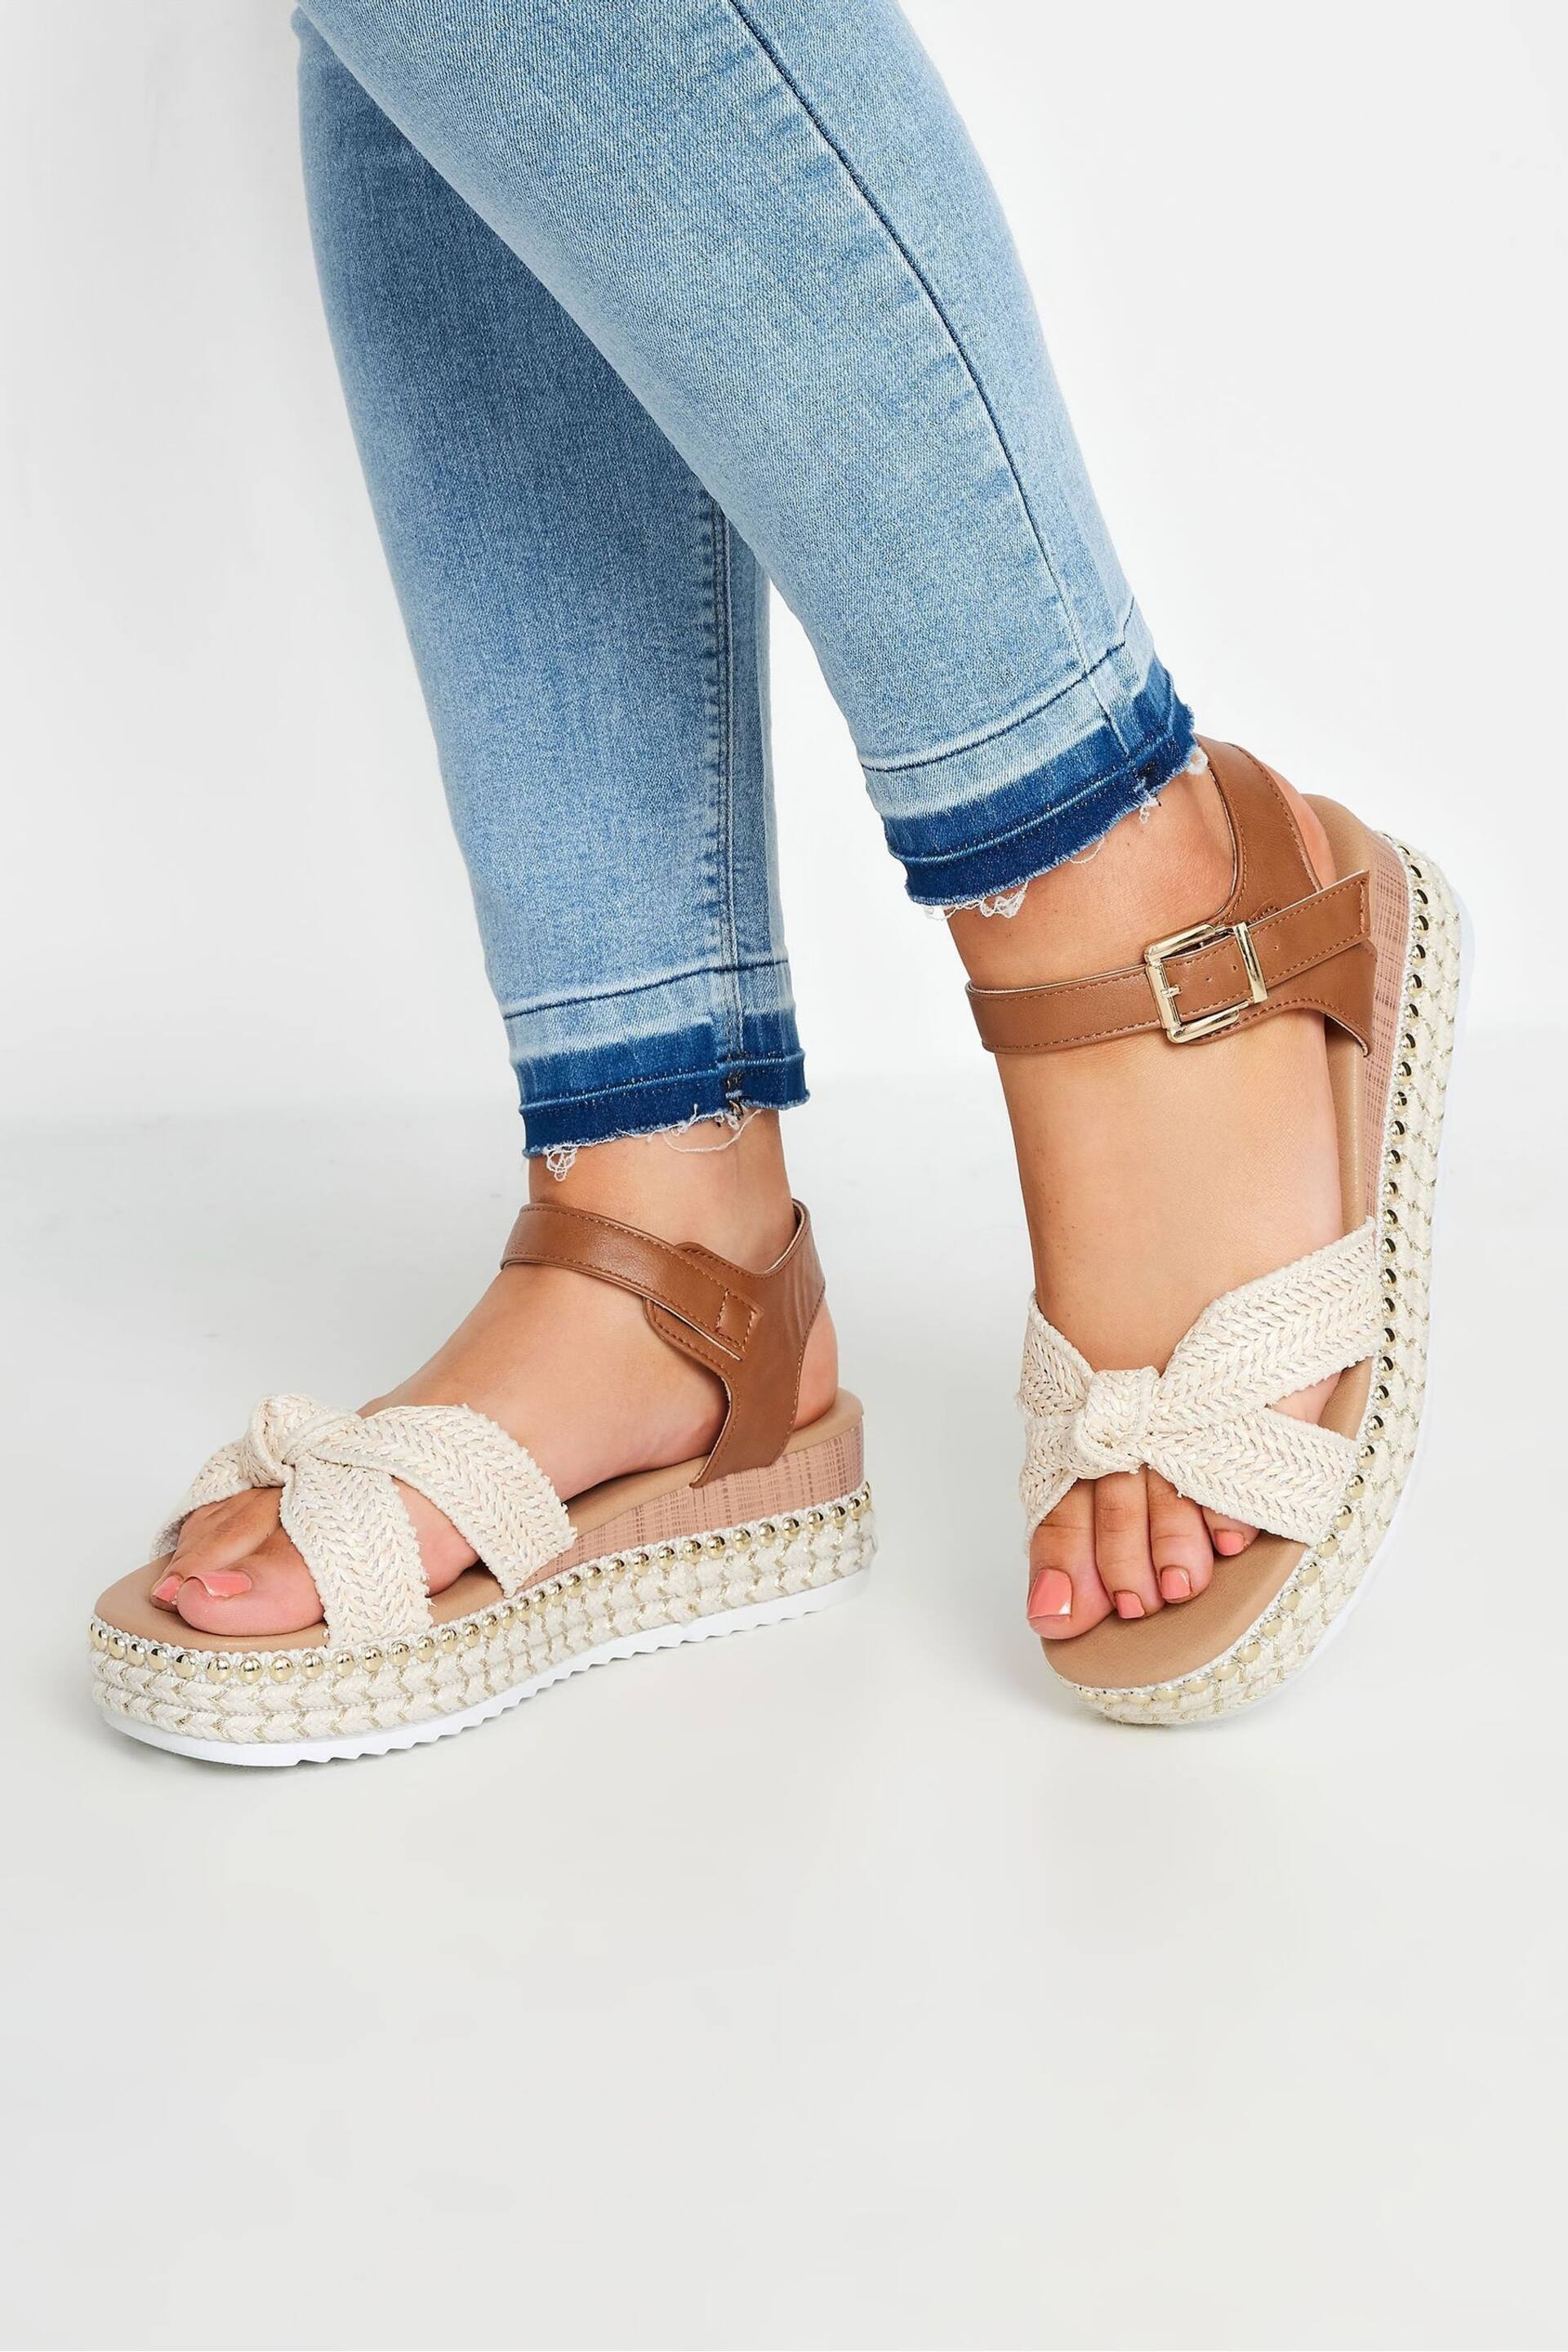 Yours Curve Natural Extra-Wide Fit Two Part Espadrilles - Image 1 of 5